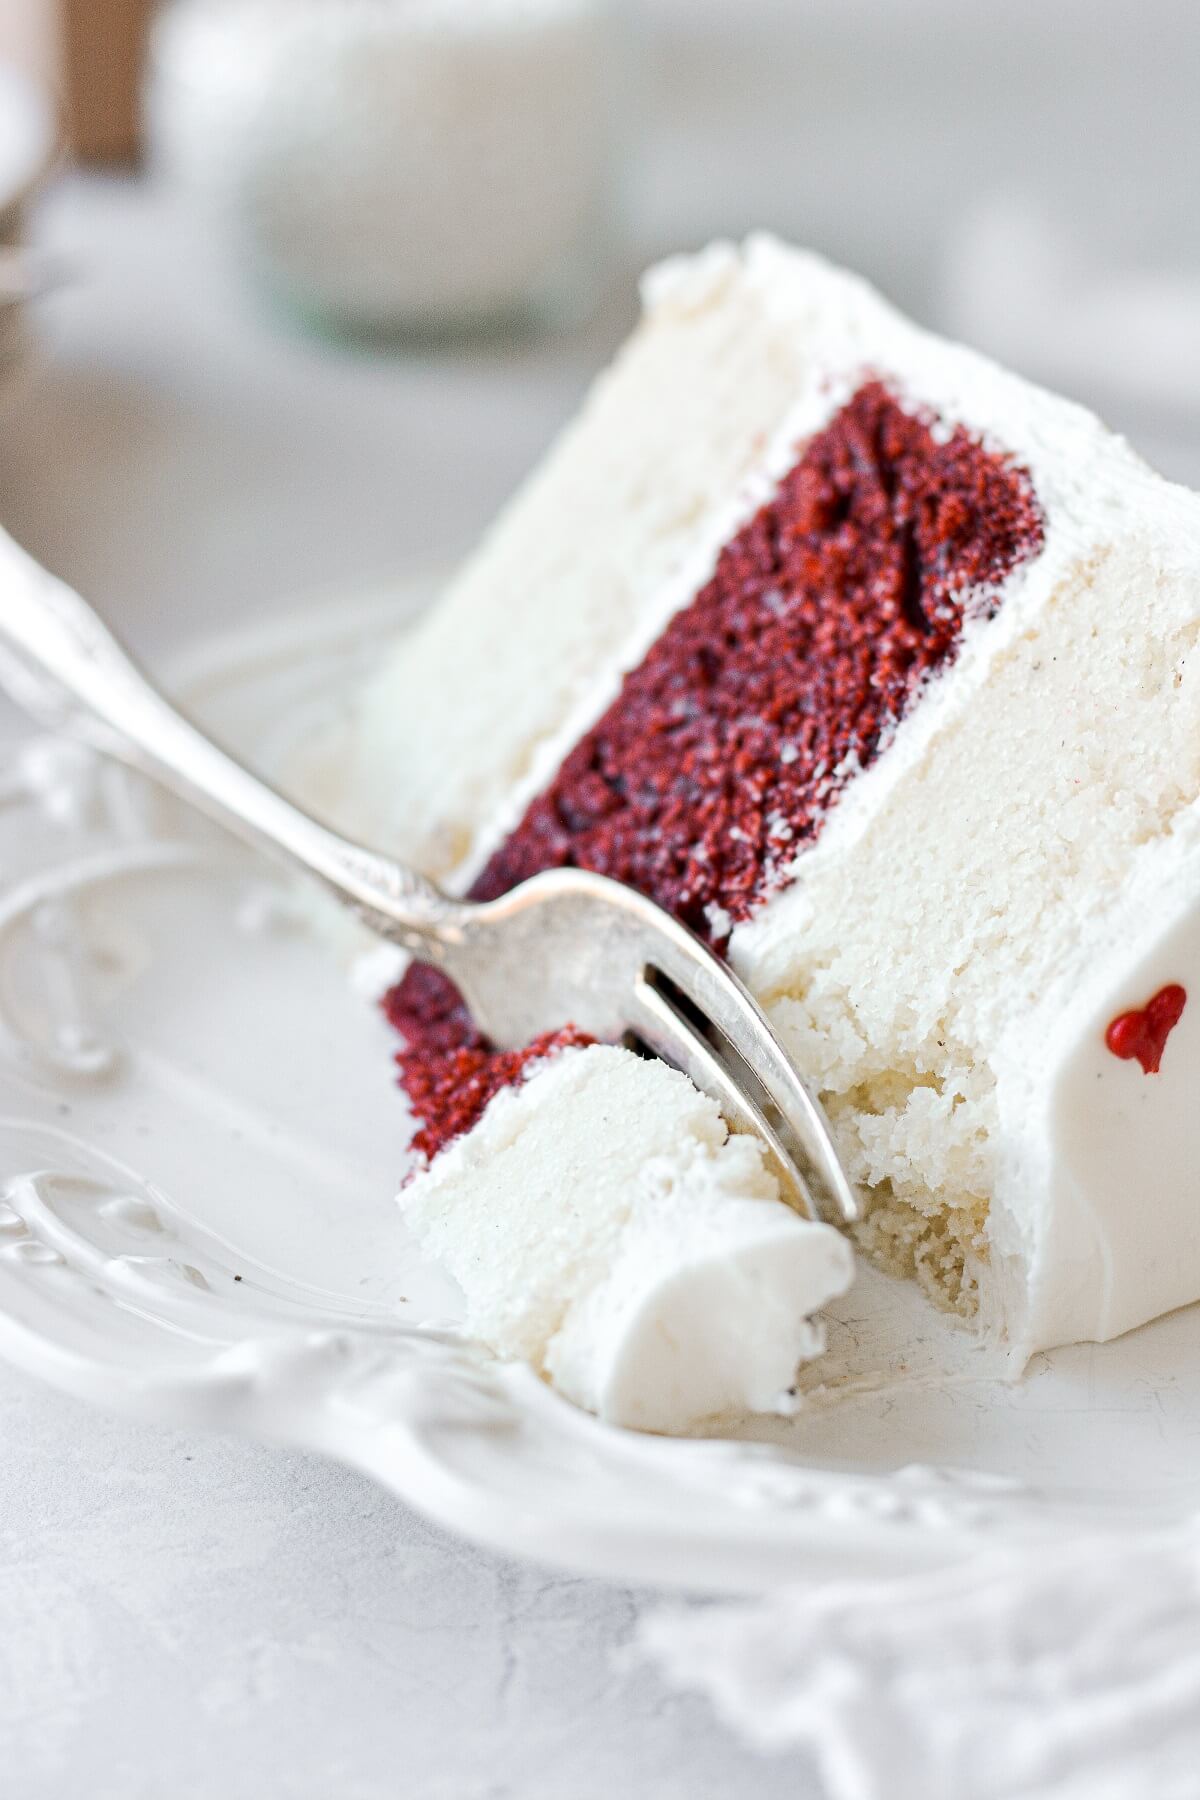 A slice of red and white striped cake for Valentines.